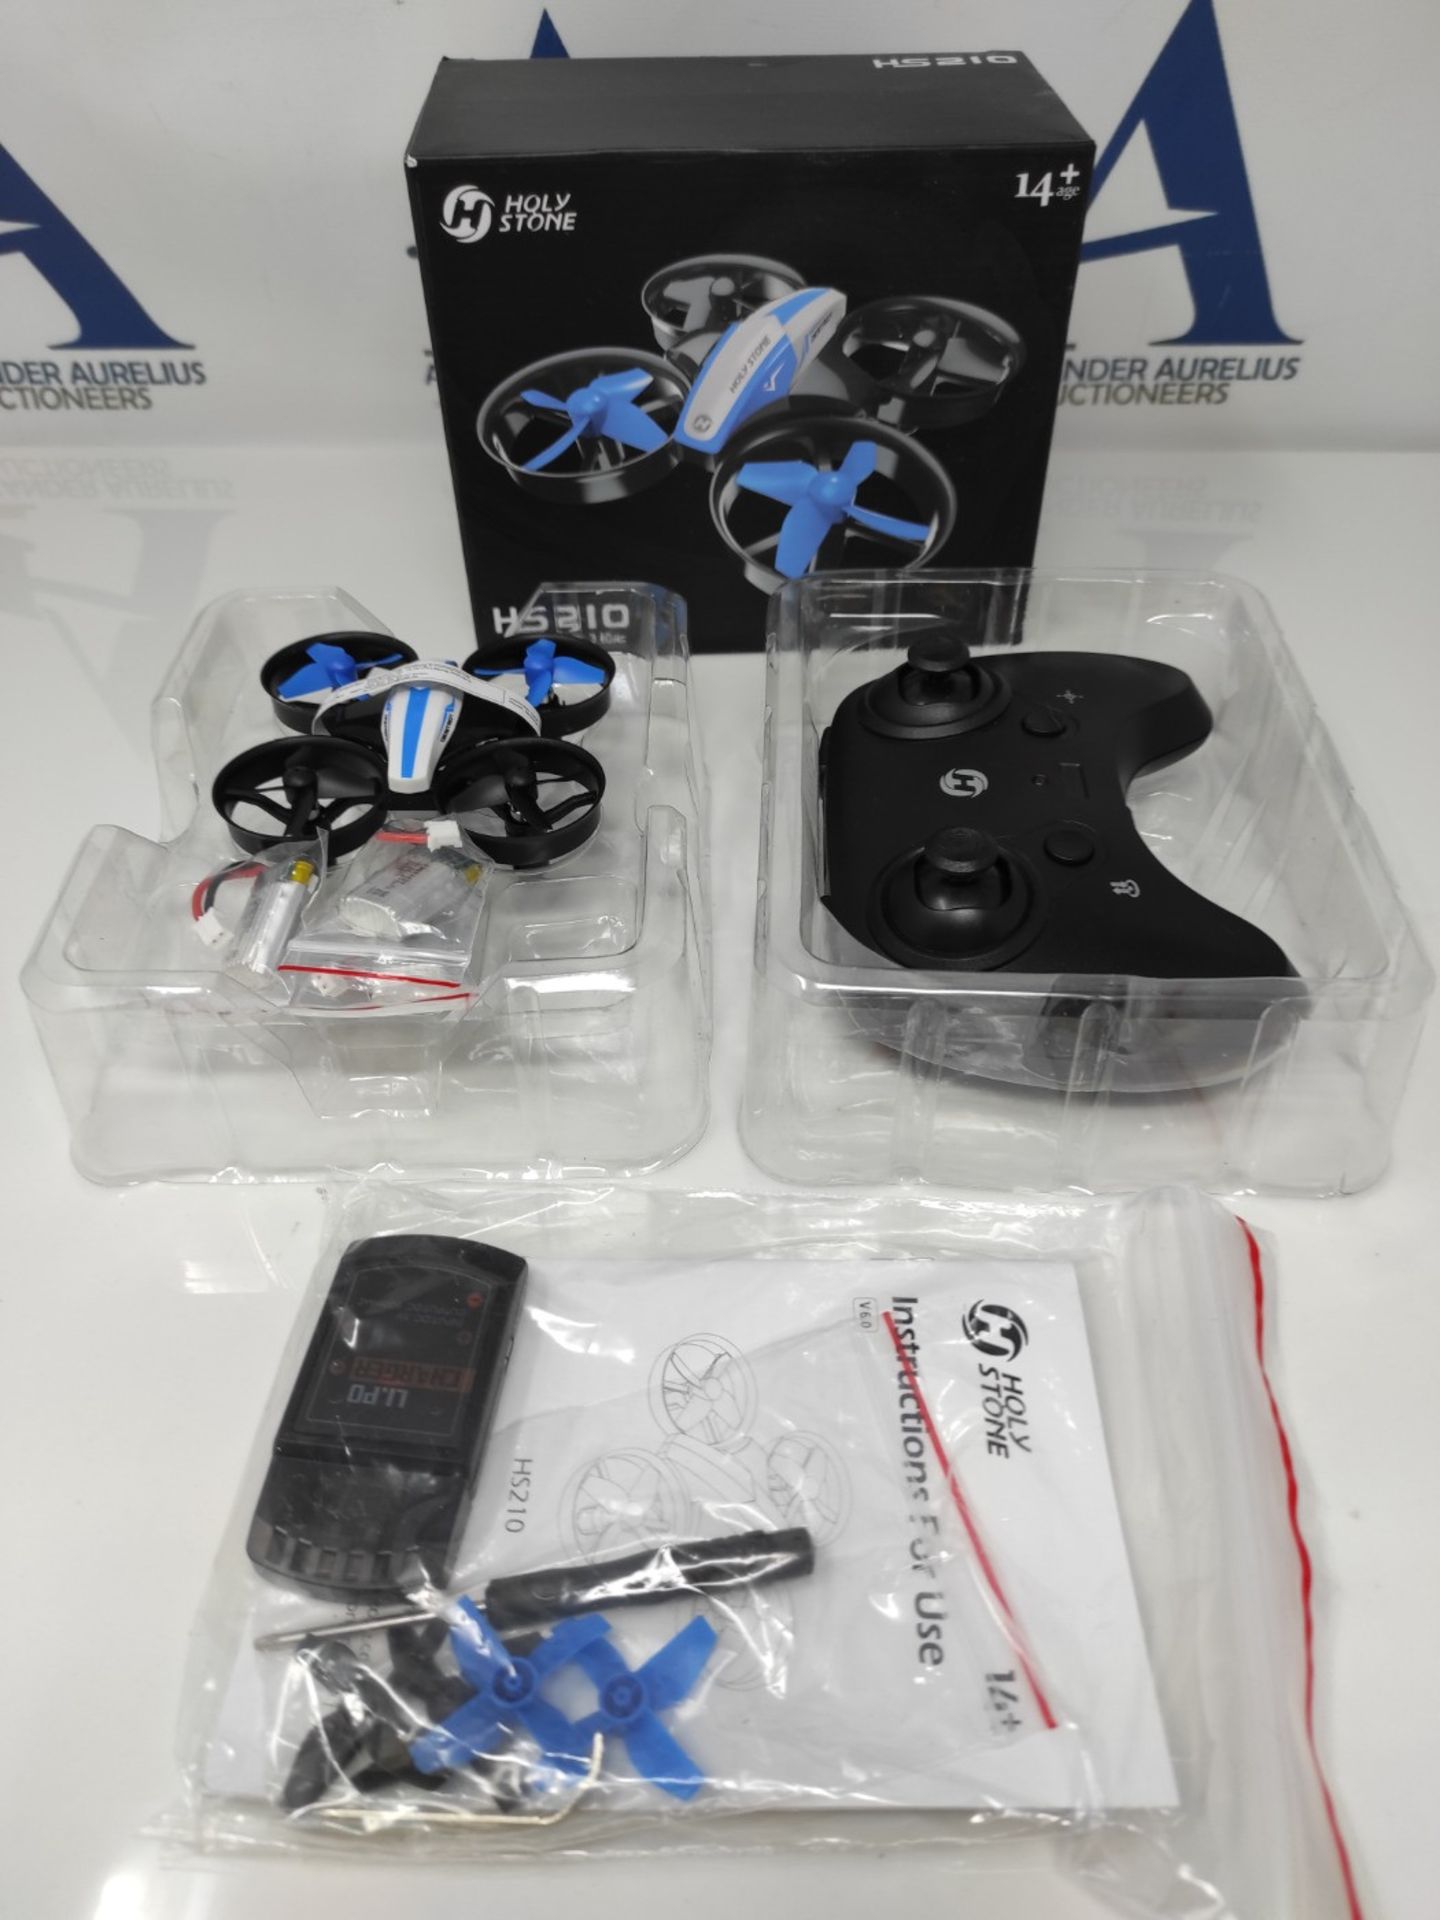 Holy Stone HS210 Mini Drone for Kids and Beginners RC Nano Quadcopter Indoor Small Hel